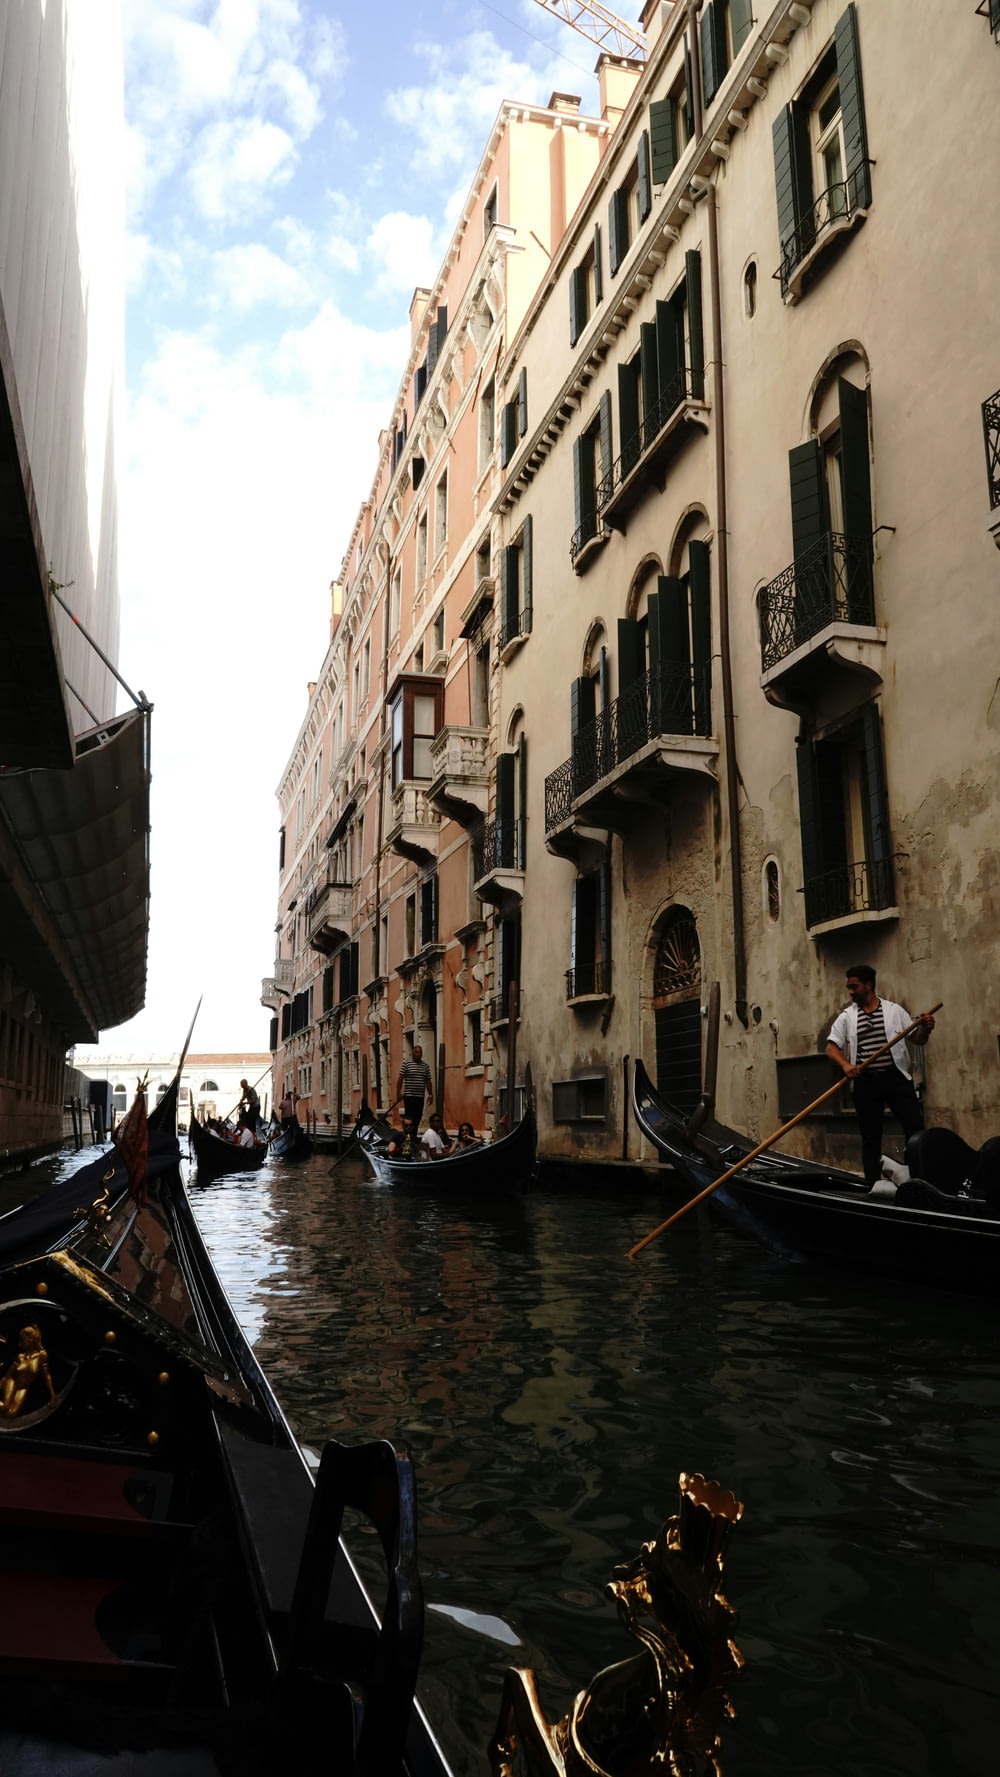 a gondola ride going down a canal in a city